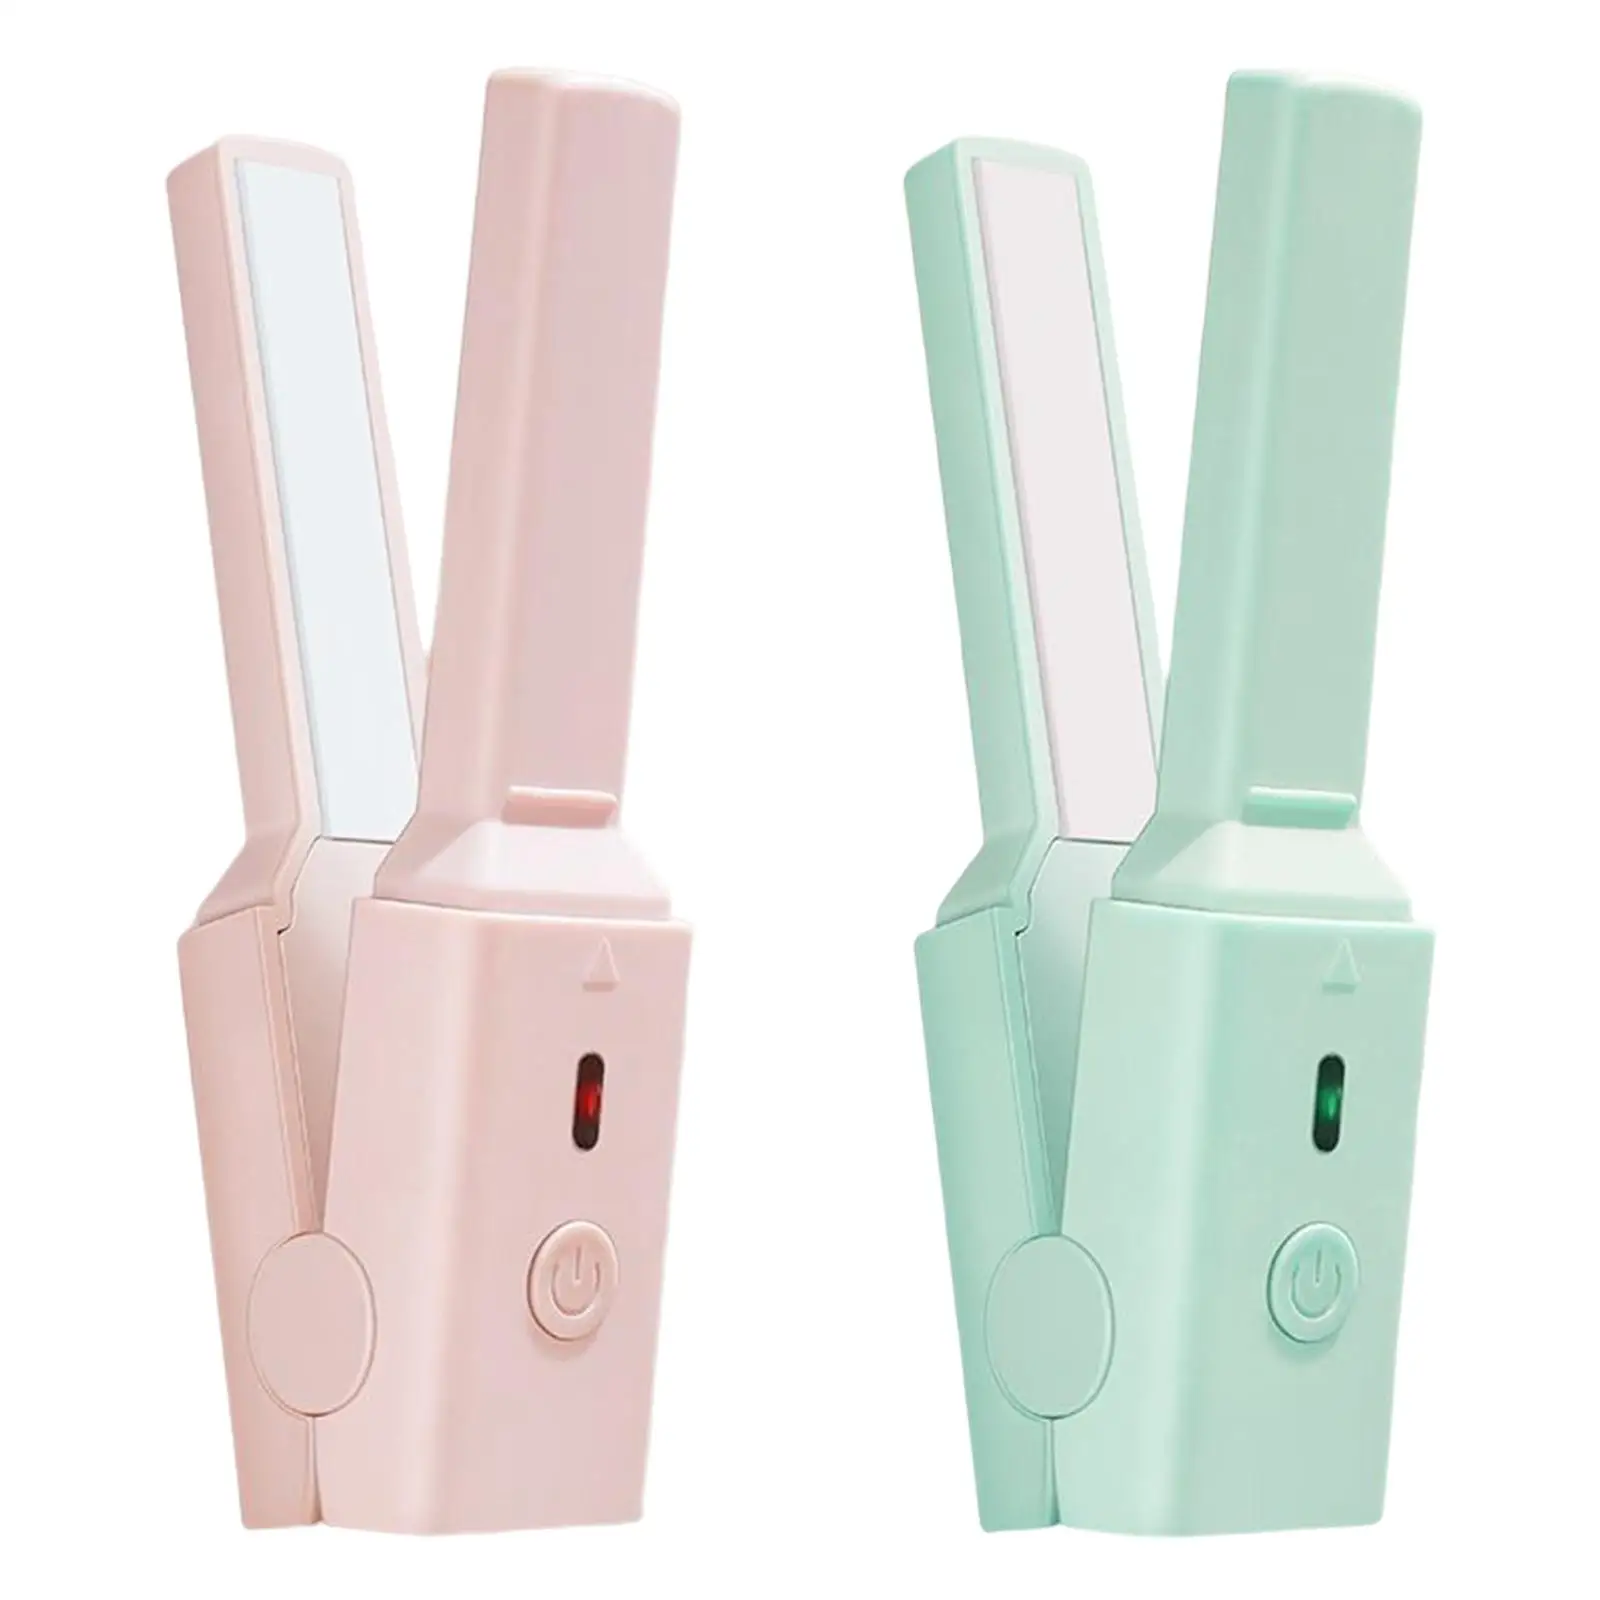 Hair Straightener and Curler Mini Size USB for Styling Tool Home Wavy Hair